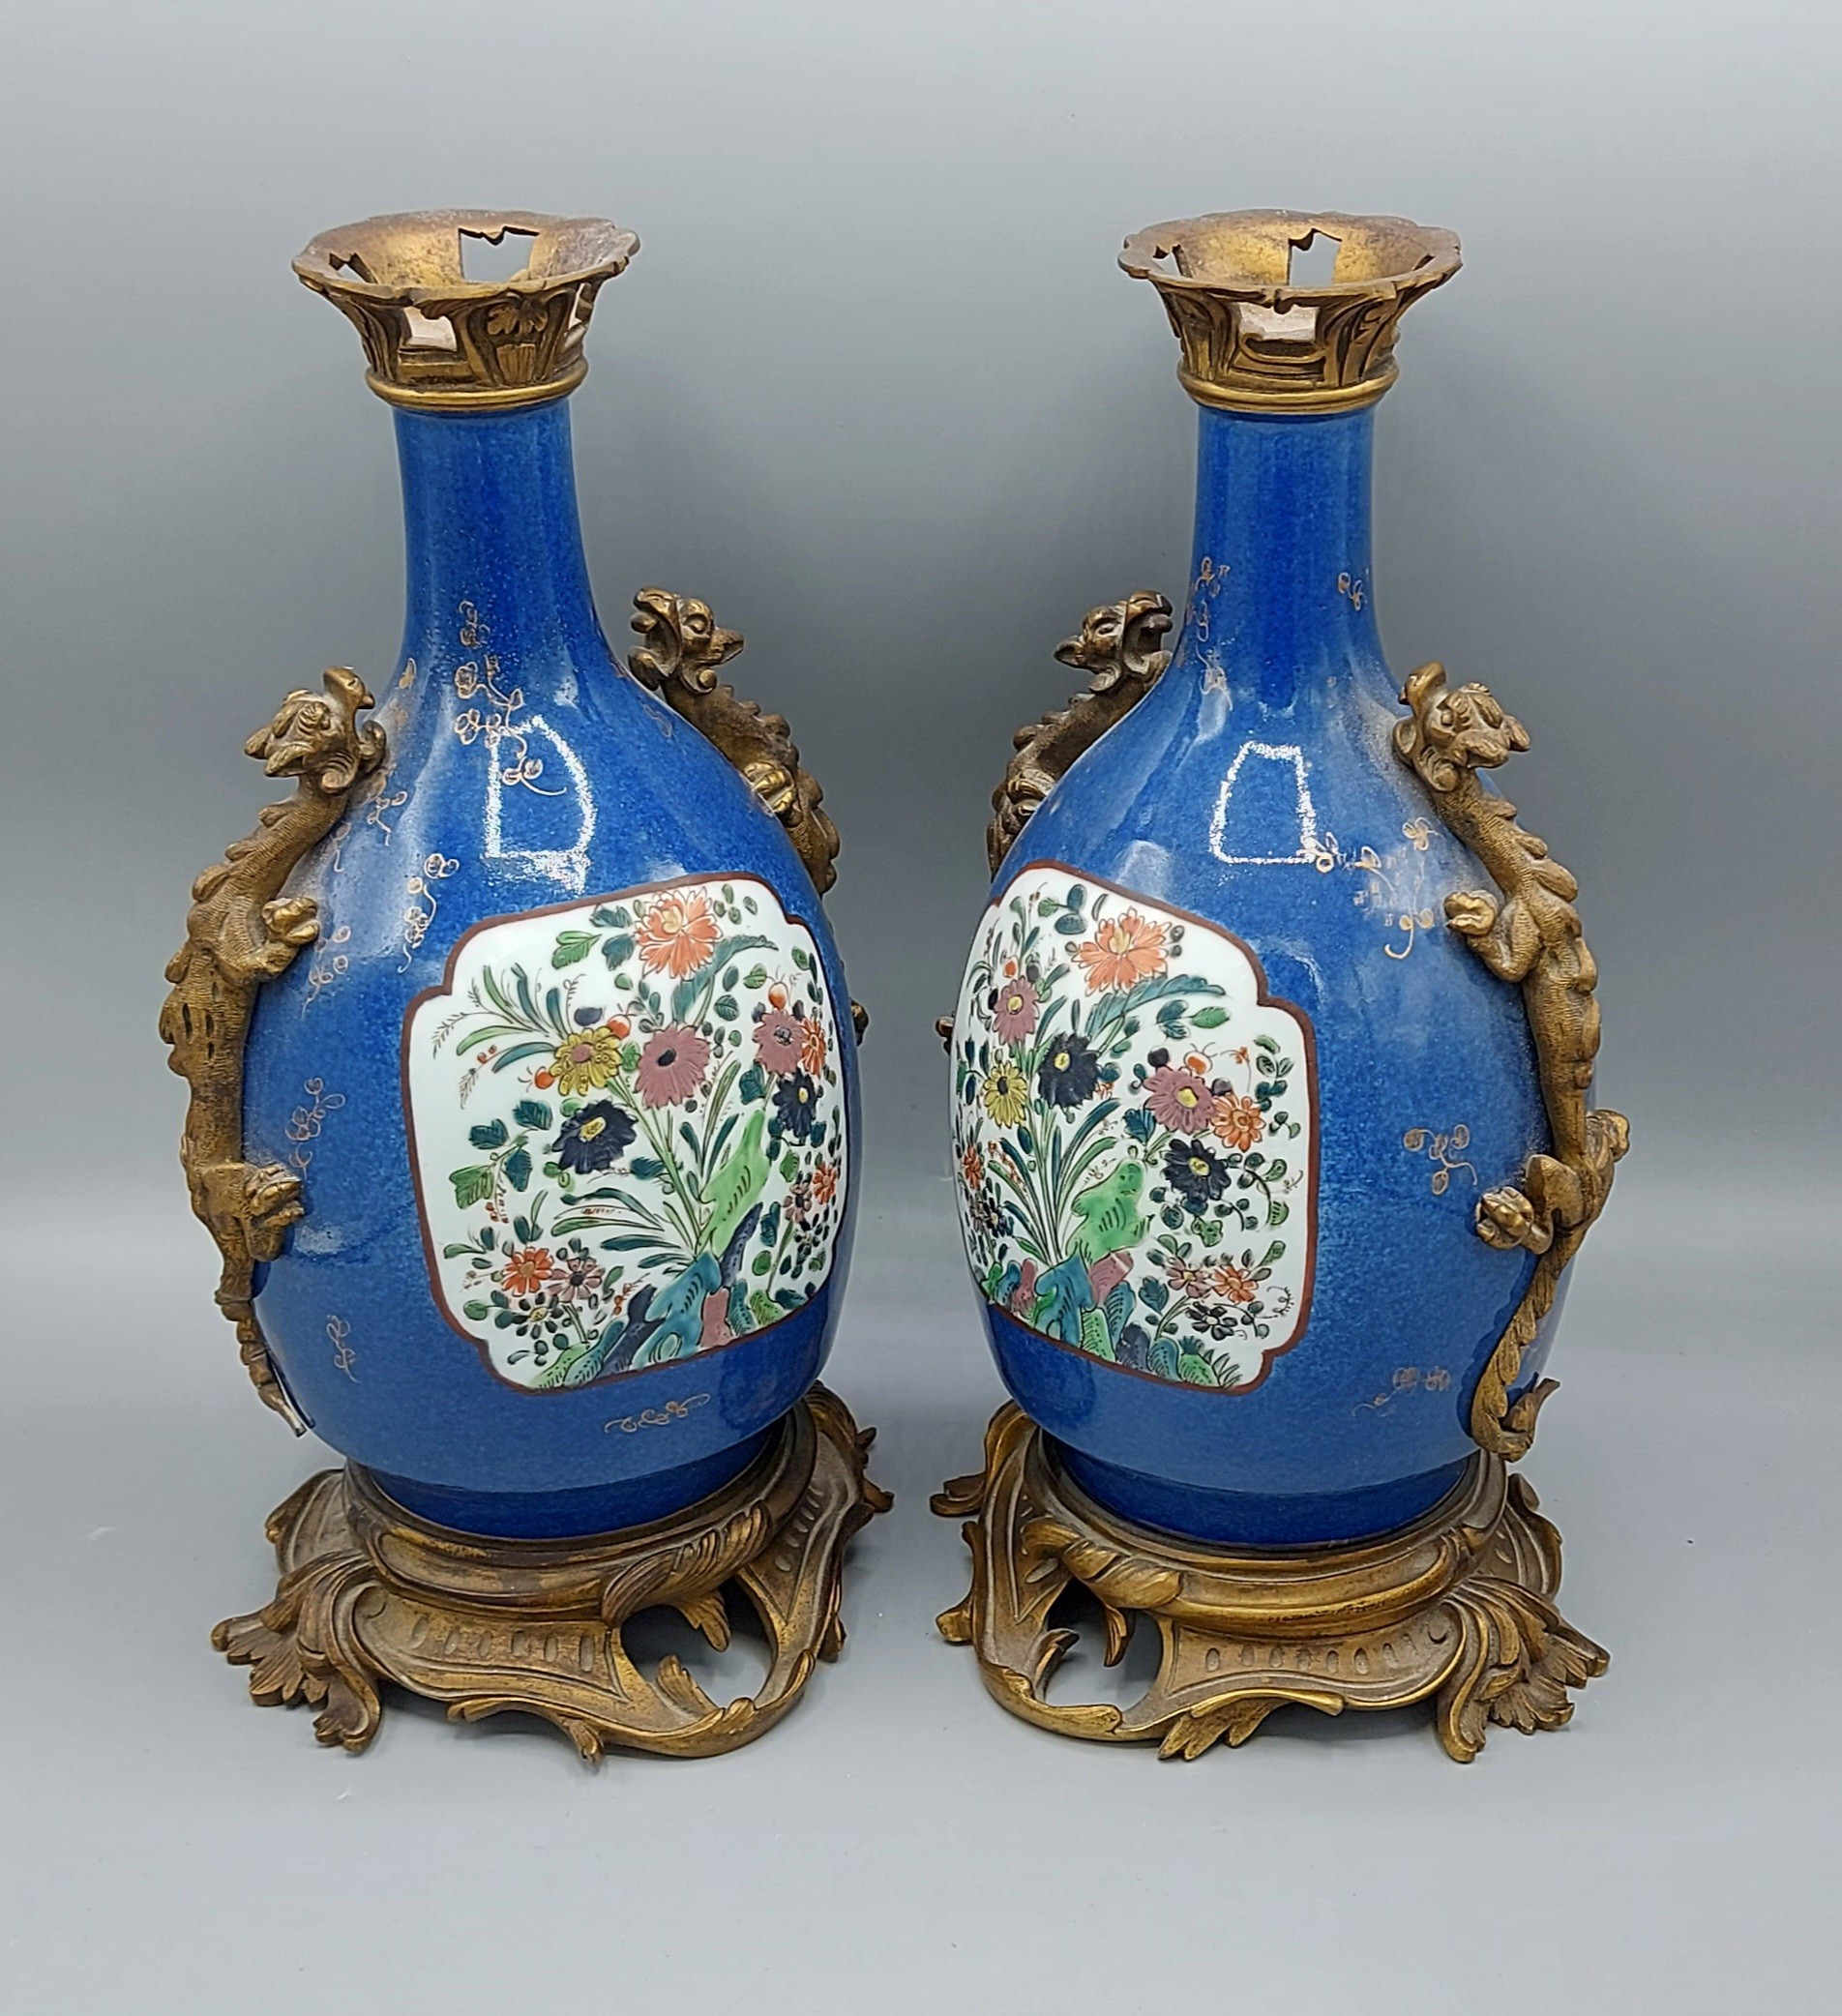 A pair of 19th Century Samson Famille Verte vases with gilt bronze mounts, each decorated with a - Image 2 of 2